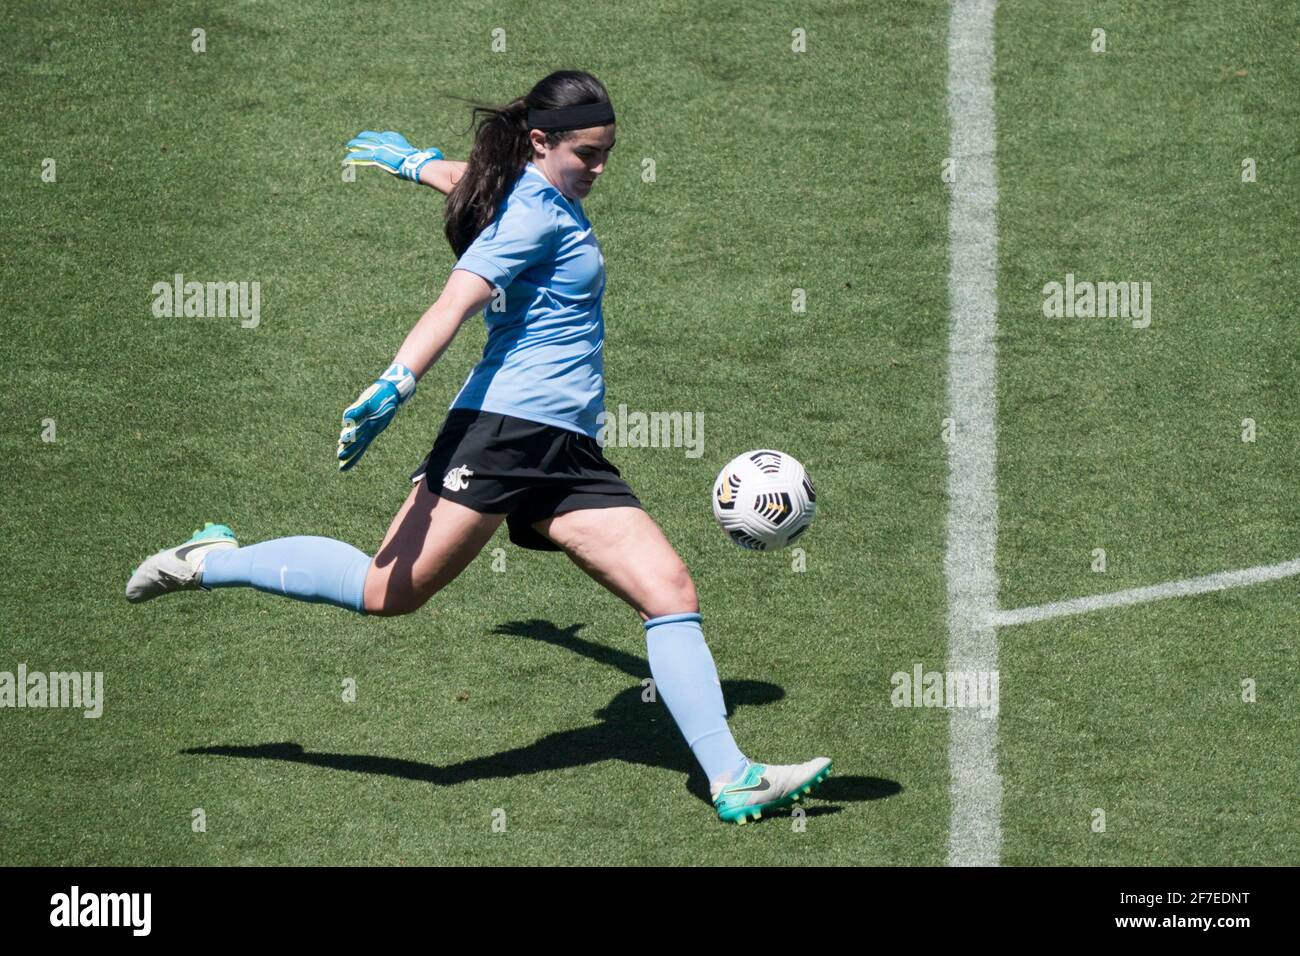 Washington State Cougars goalkeeper Marissa Zucchetto (0) during a NCAA women’s soccer match against the USC Trojans, Sunday, April 4, 2021, in Los An Stock Photo